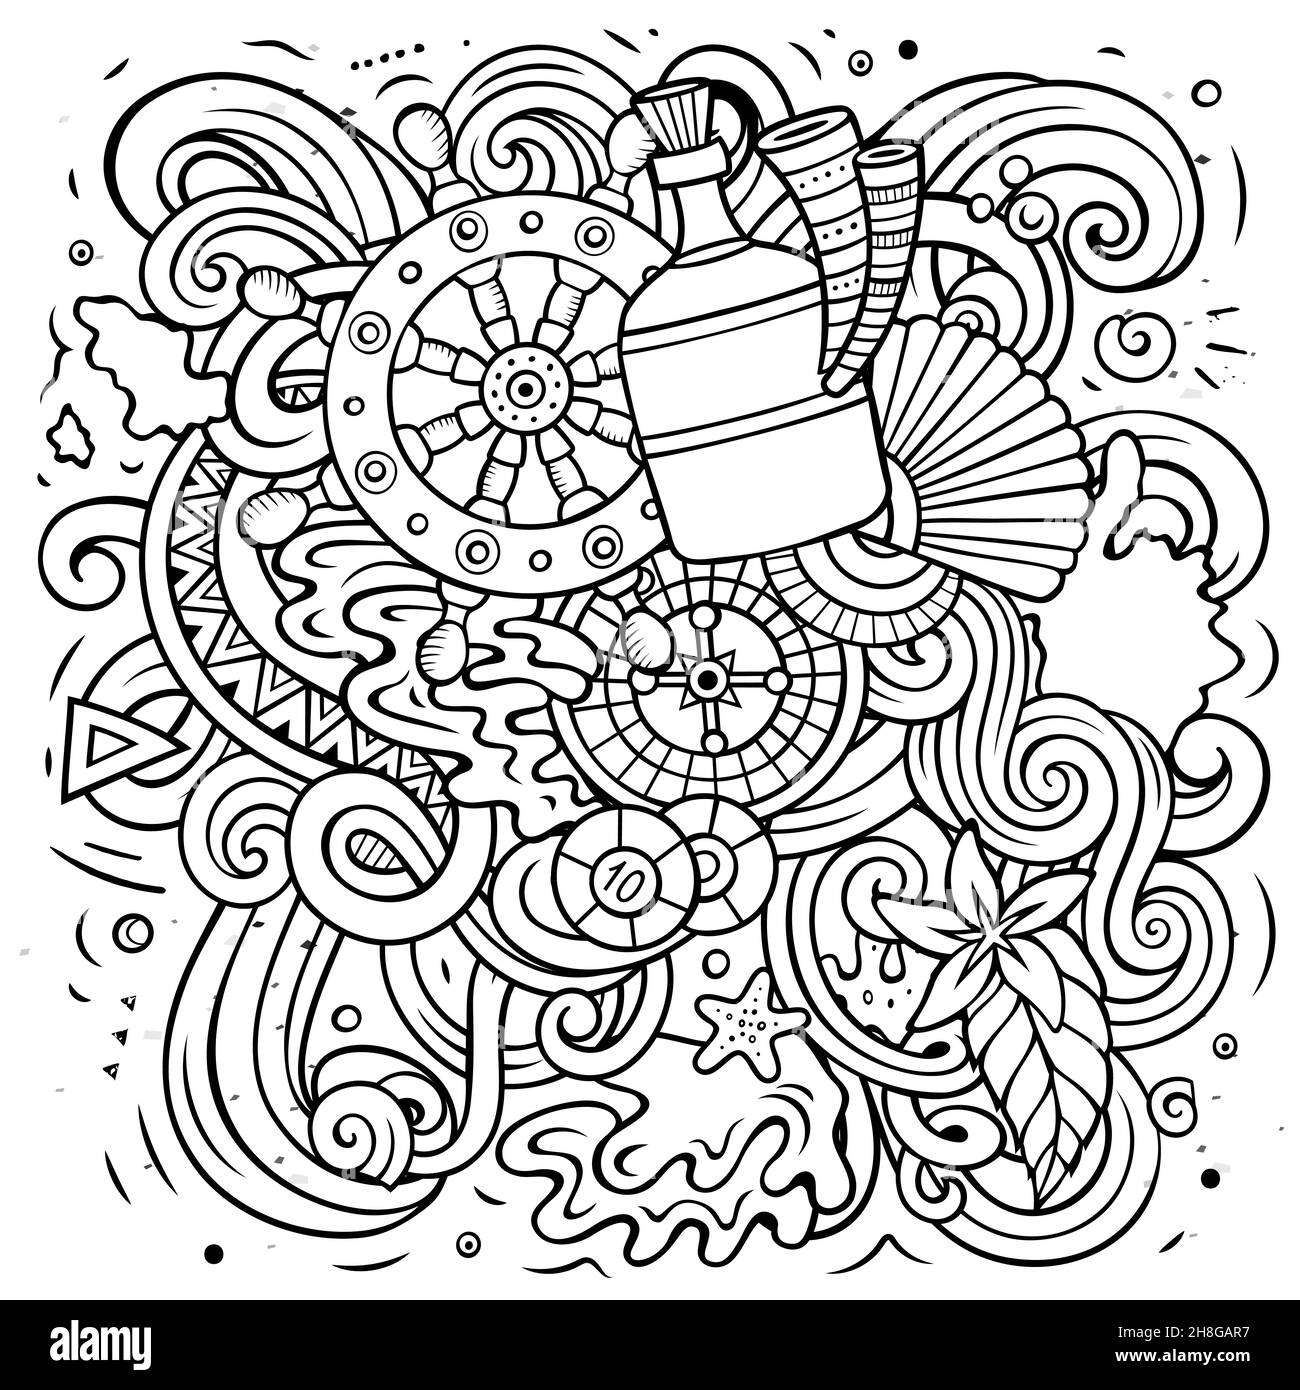 Bahamas cartoon vector doodle illustration. Line art detailed composition with lot of tropical objects and symbols. Stock Vector